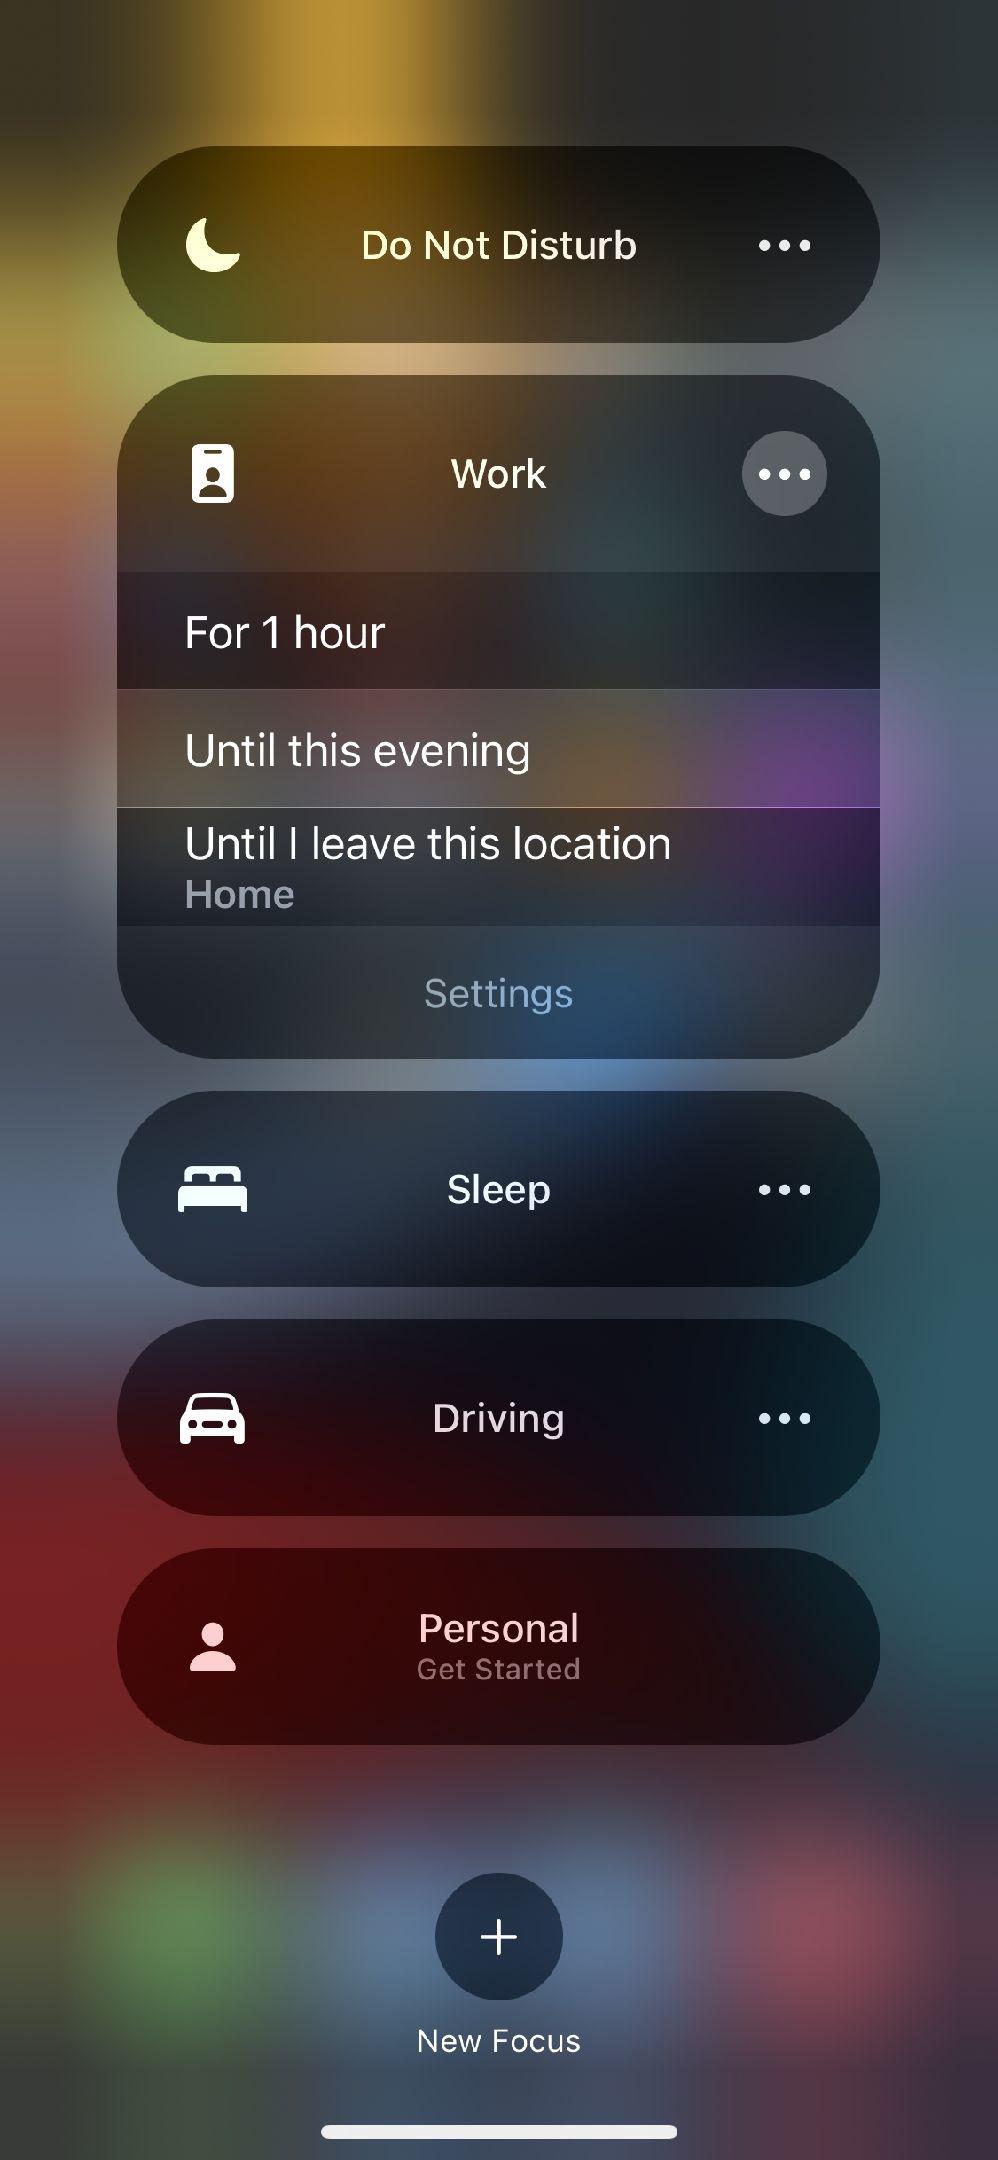 Focus mode advanced options in the Control Center